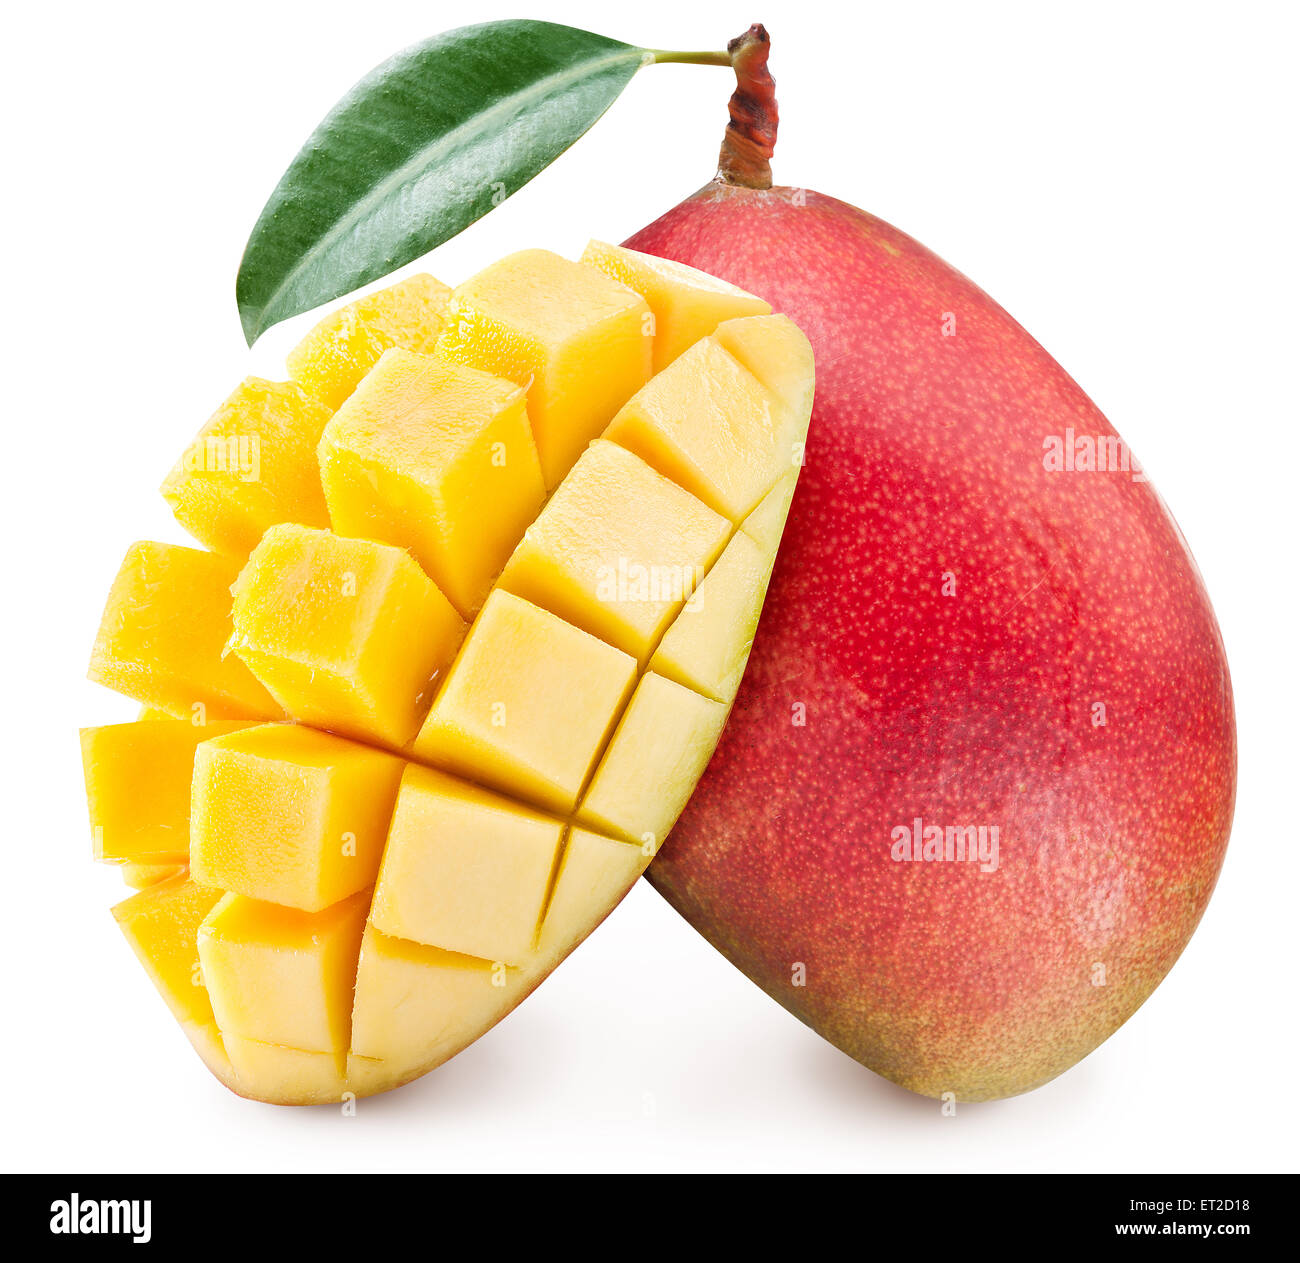 Ripe mango fruit. File contains clipping paths. Stock Photo